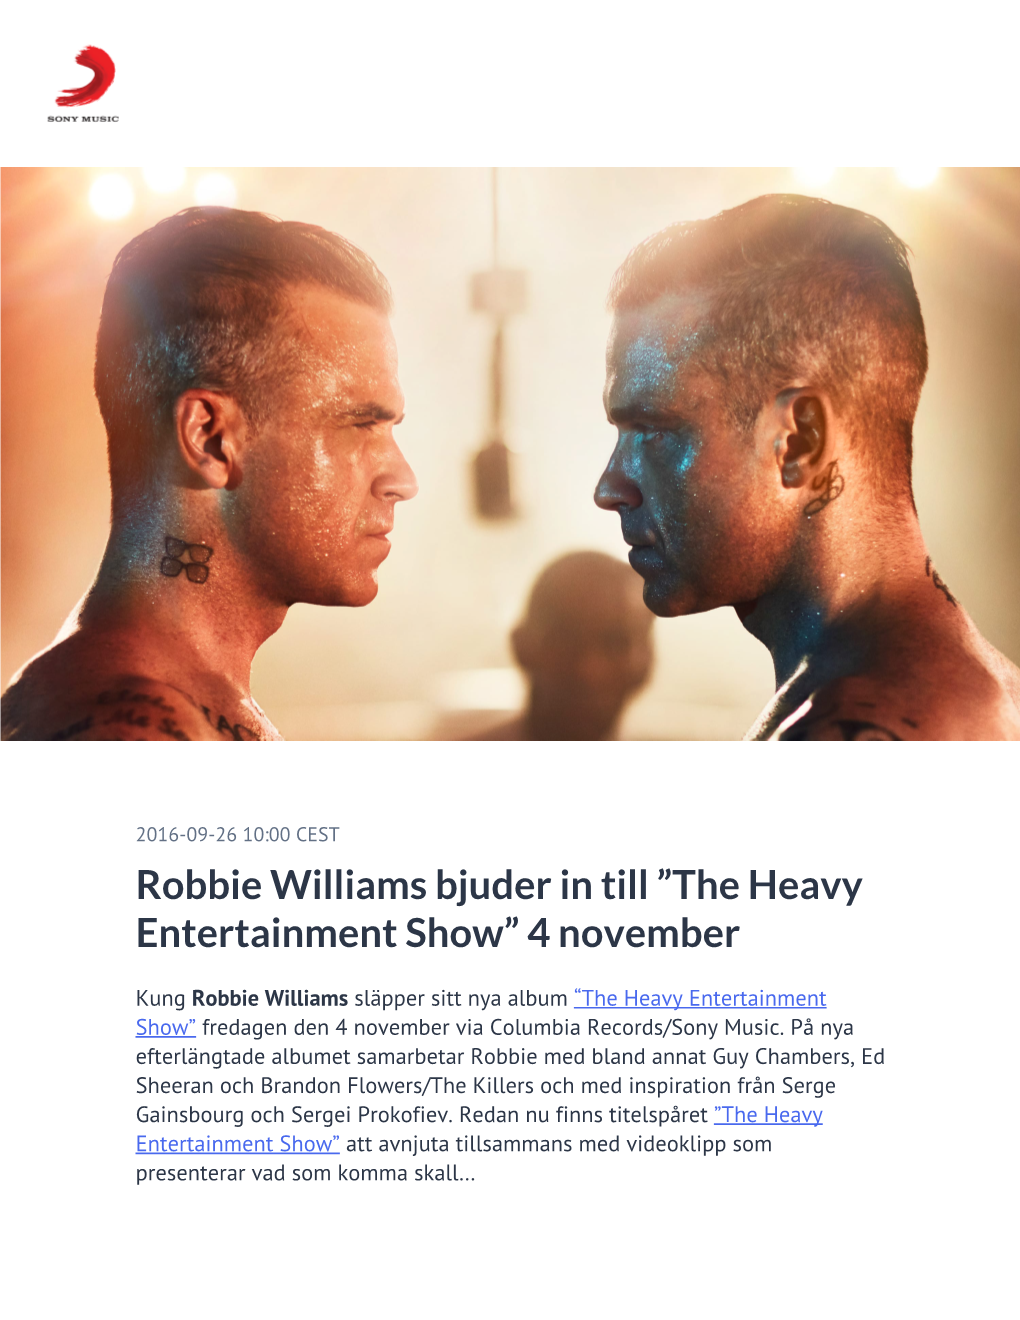 Robbie Williams Bjuder in Till ”The Heavy Entertainment Show” 4 November